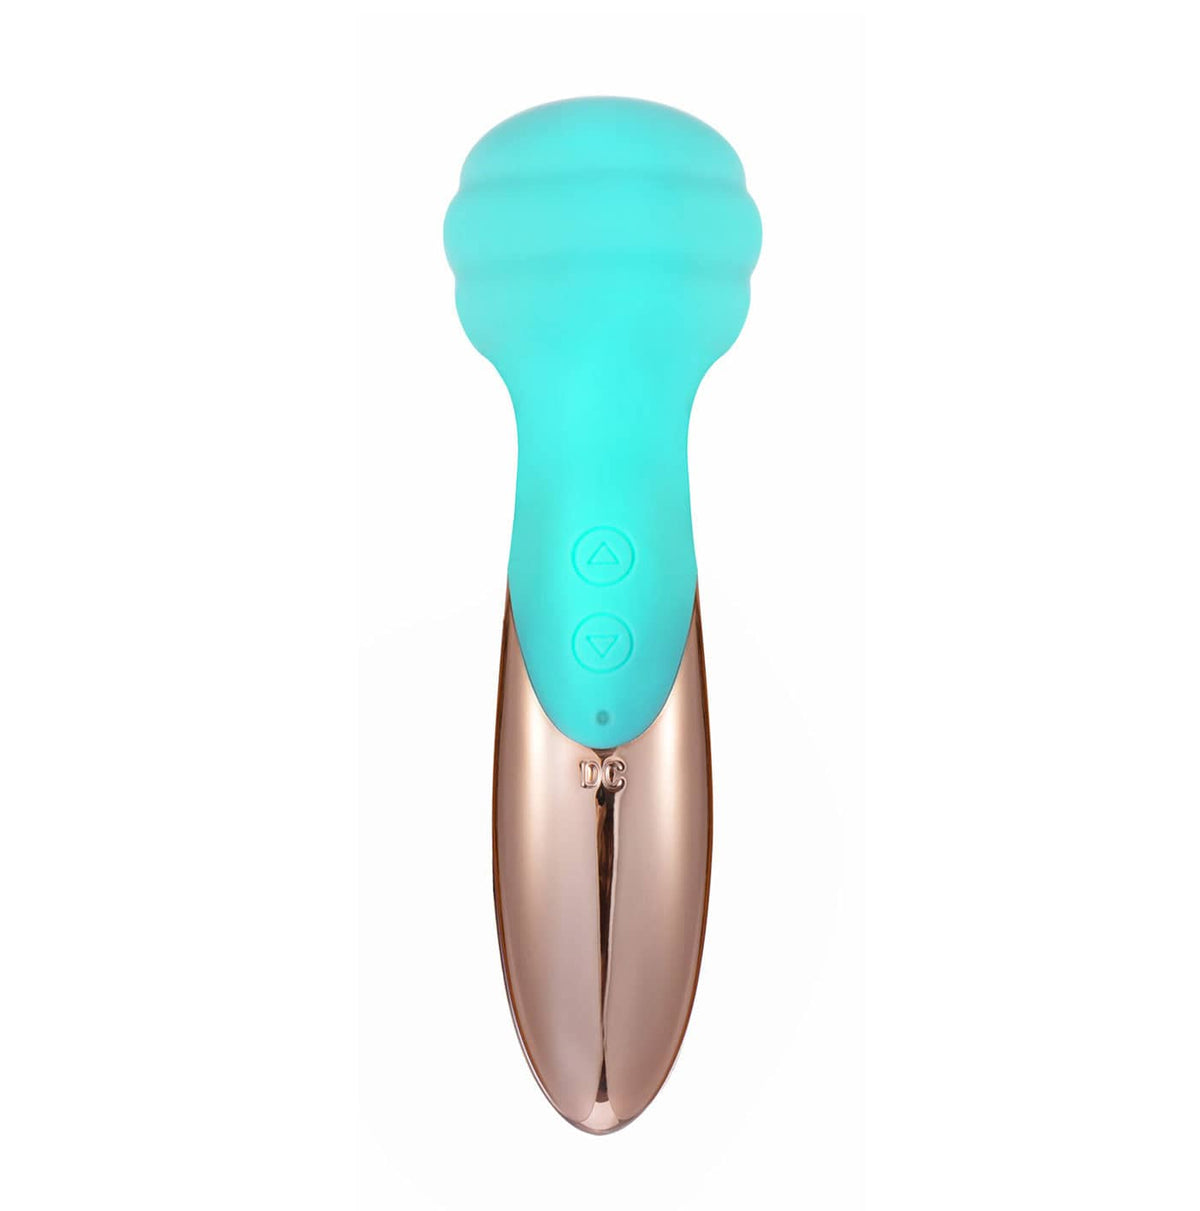 pocket vibrator with remote, best small vibrator